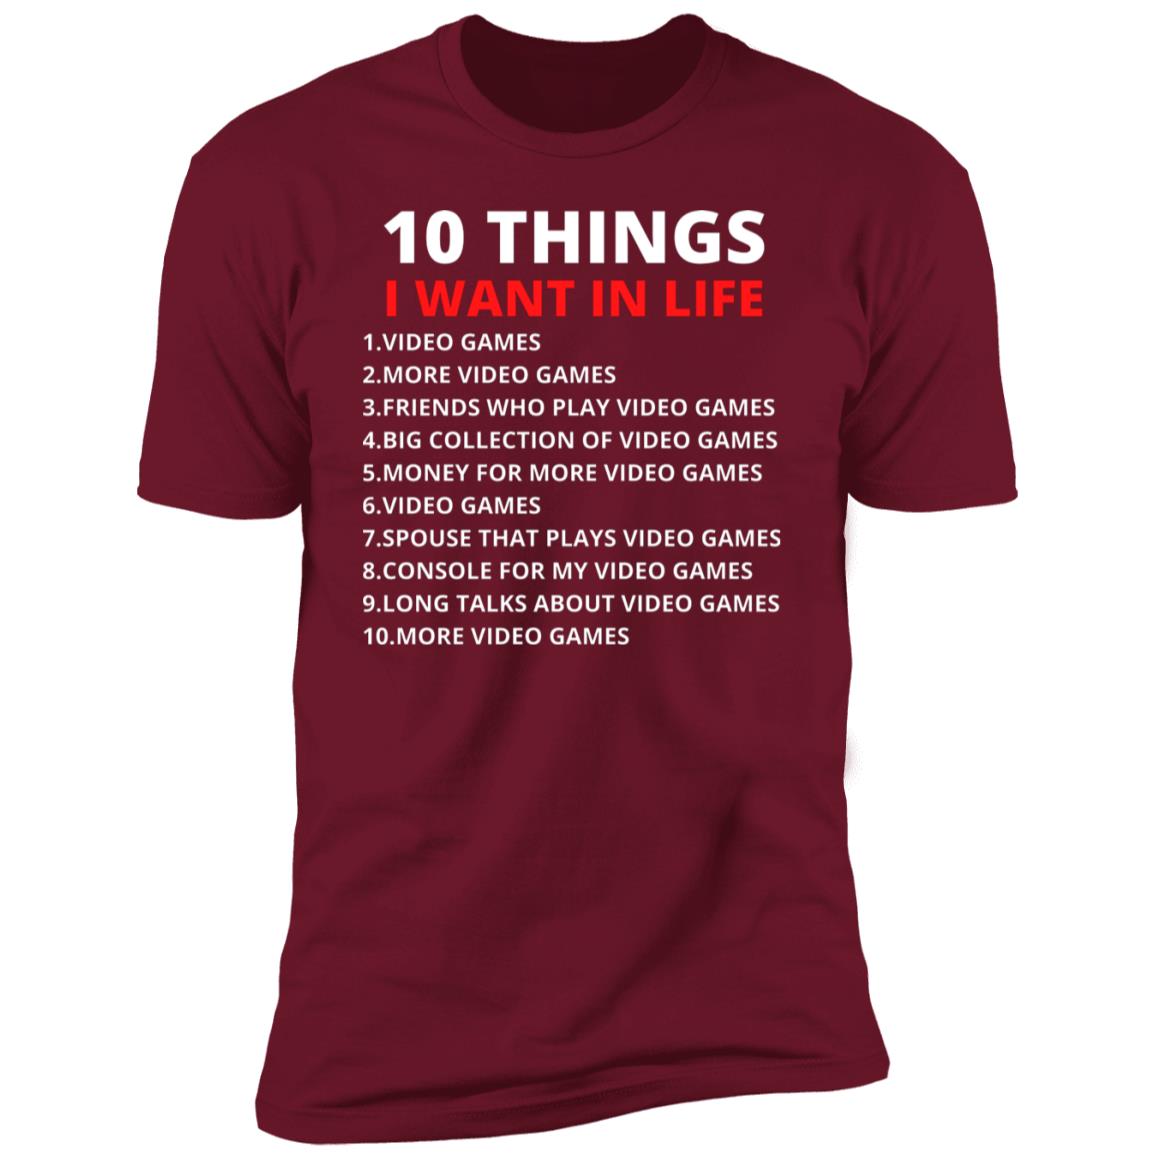 10 Things I Want In Life Shirt Funny VIDEO GAME VERSION